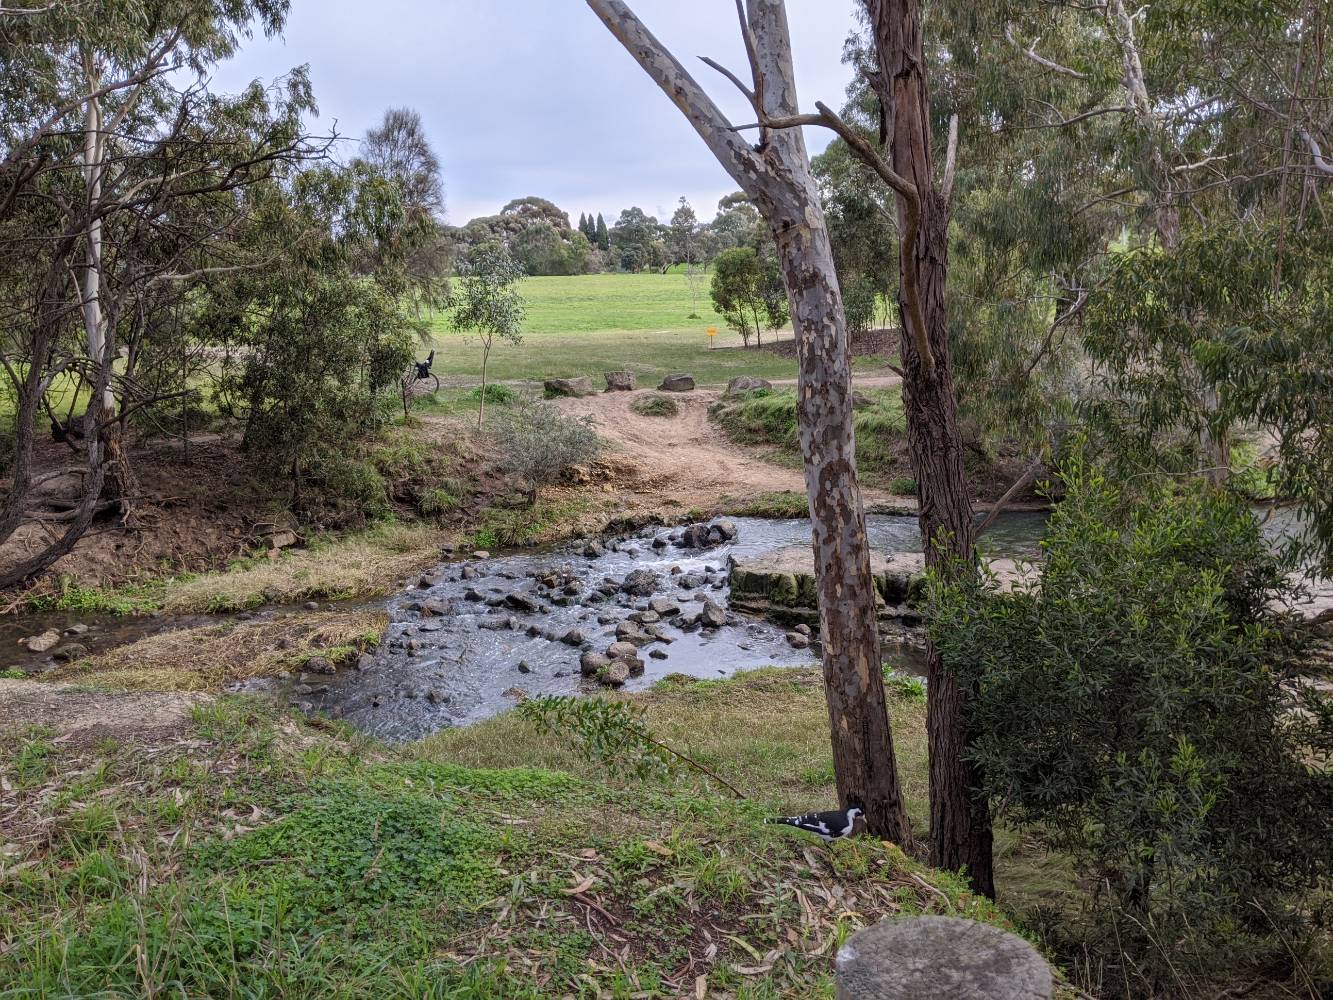 Edgars Creek is a short walk away and a popular off-lead area for dogs to walk and swim